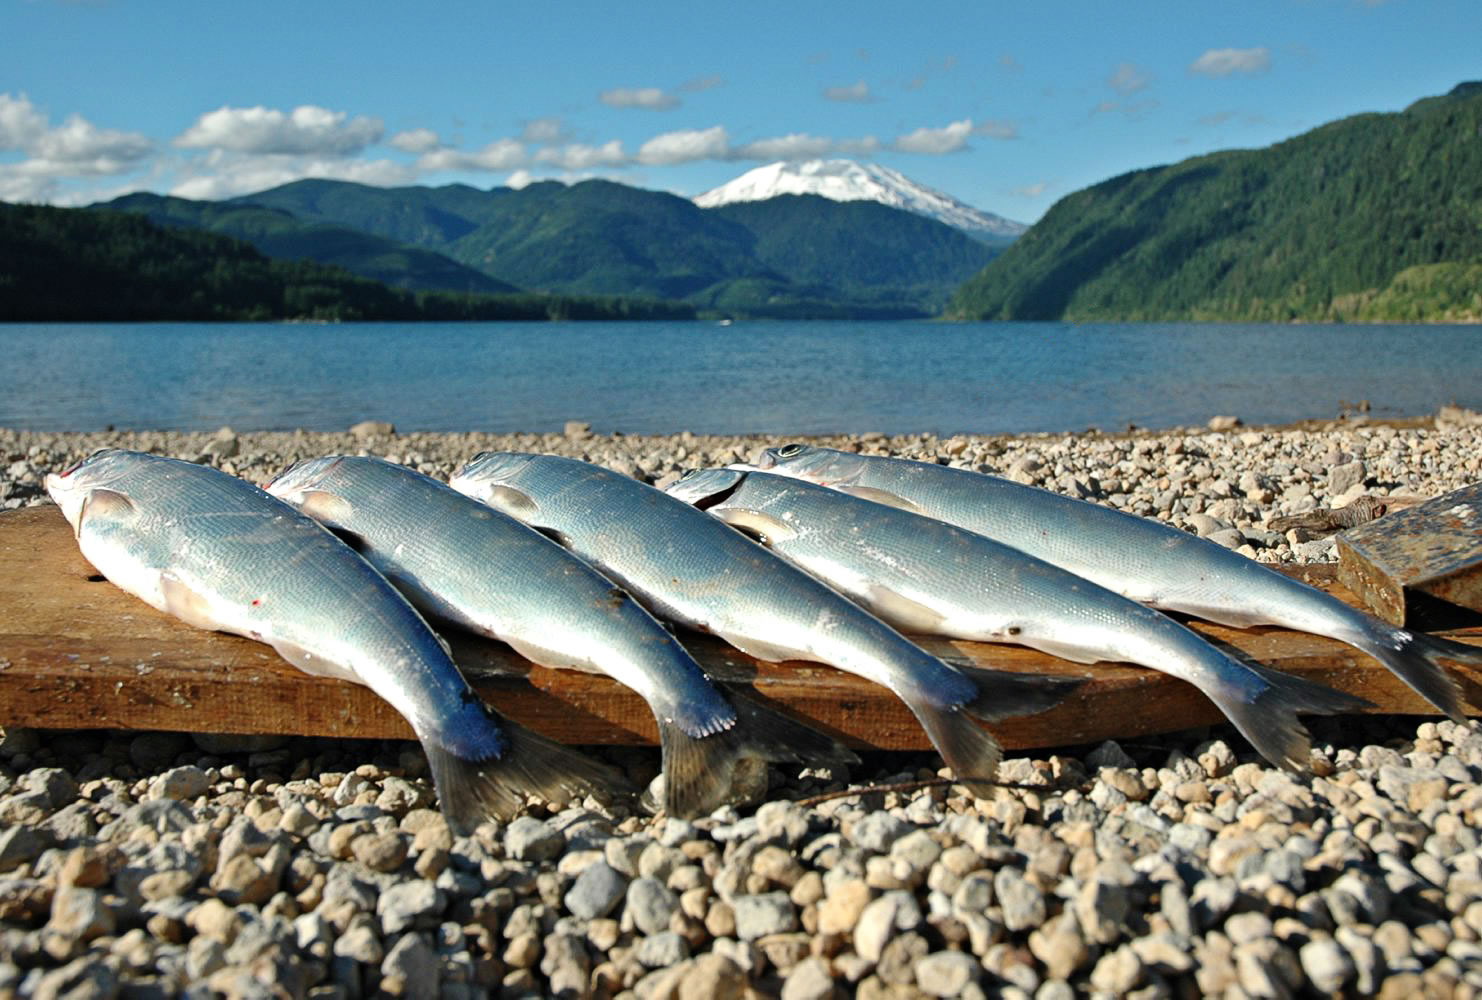 Yale Reservoir on the North Fork of the Lewis River has been yielding lots of kokanee averaging 10 to 11 inches this summer.